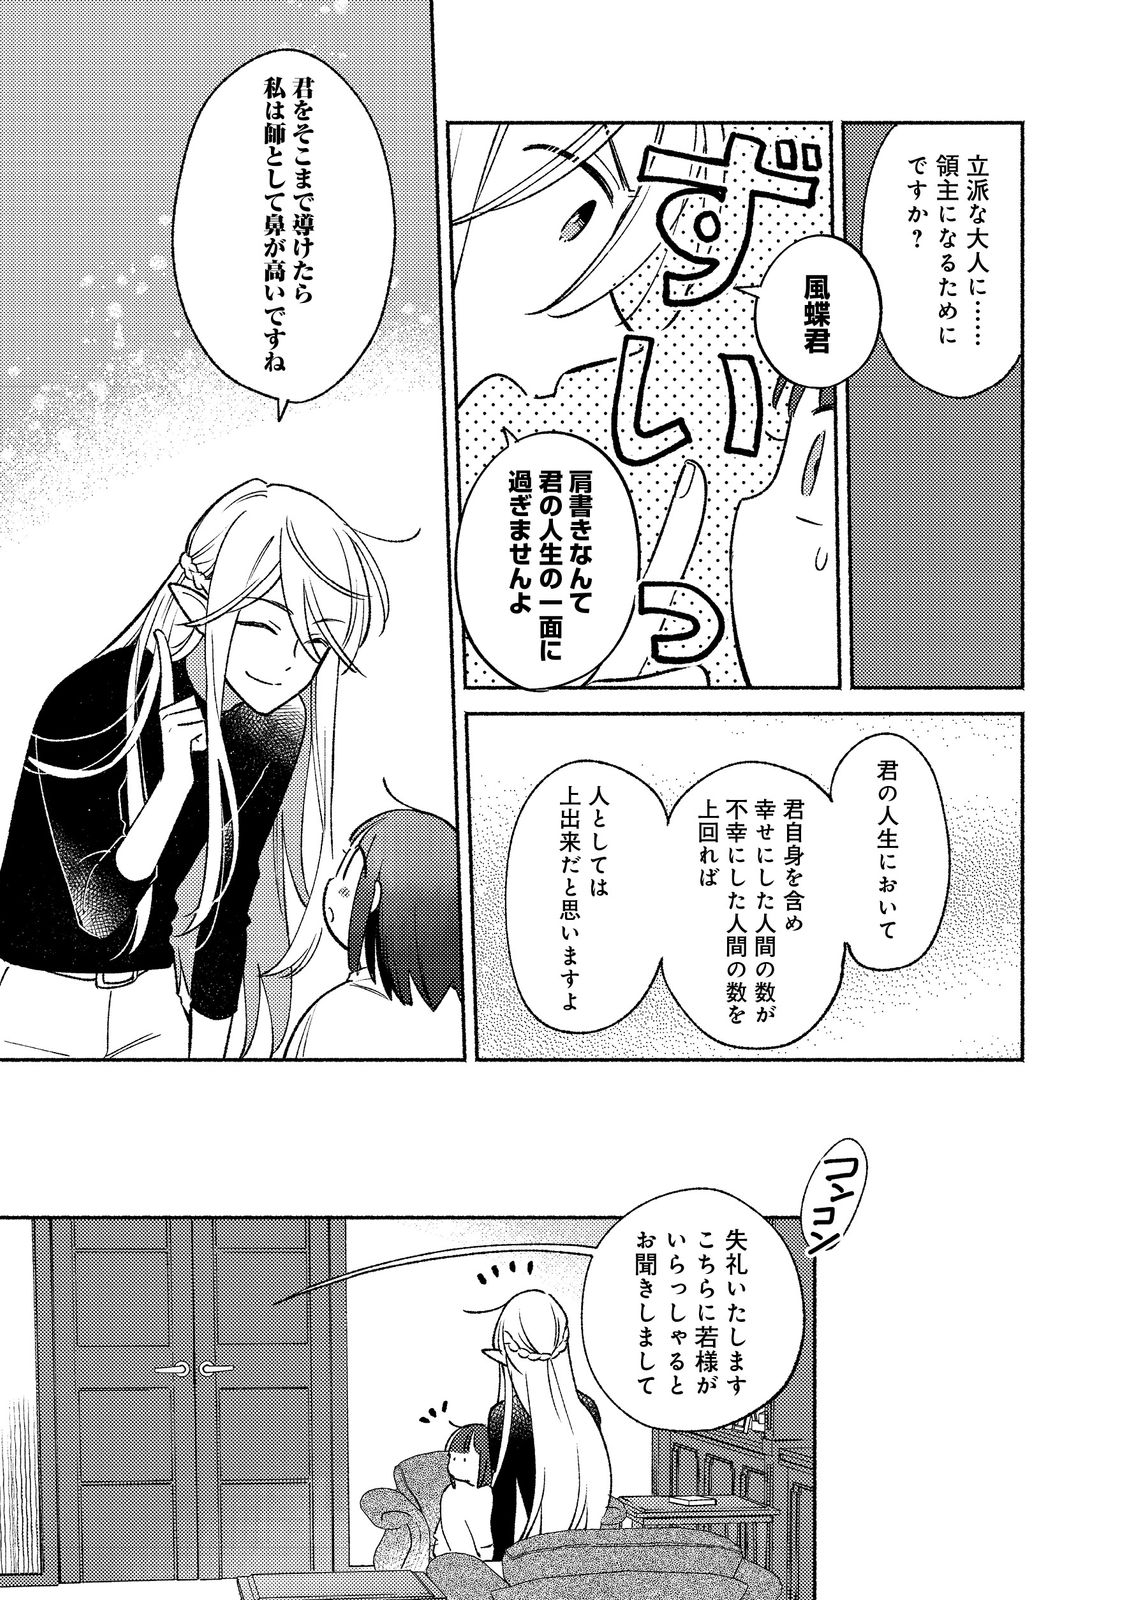 I’m the White Pig Nobleman 第16.2話 - Page 5